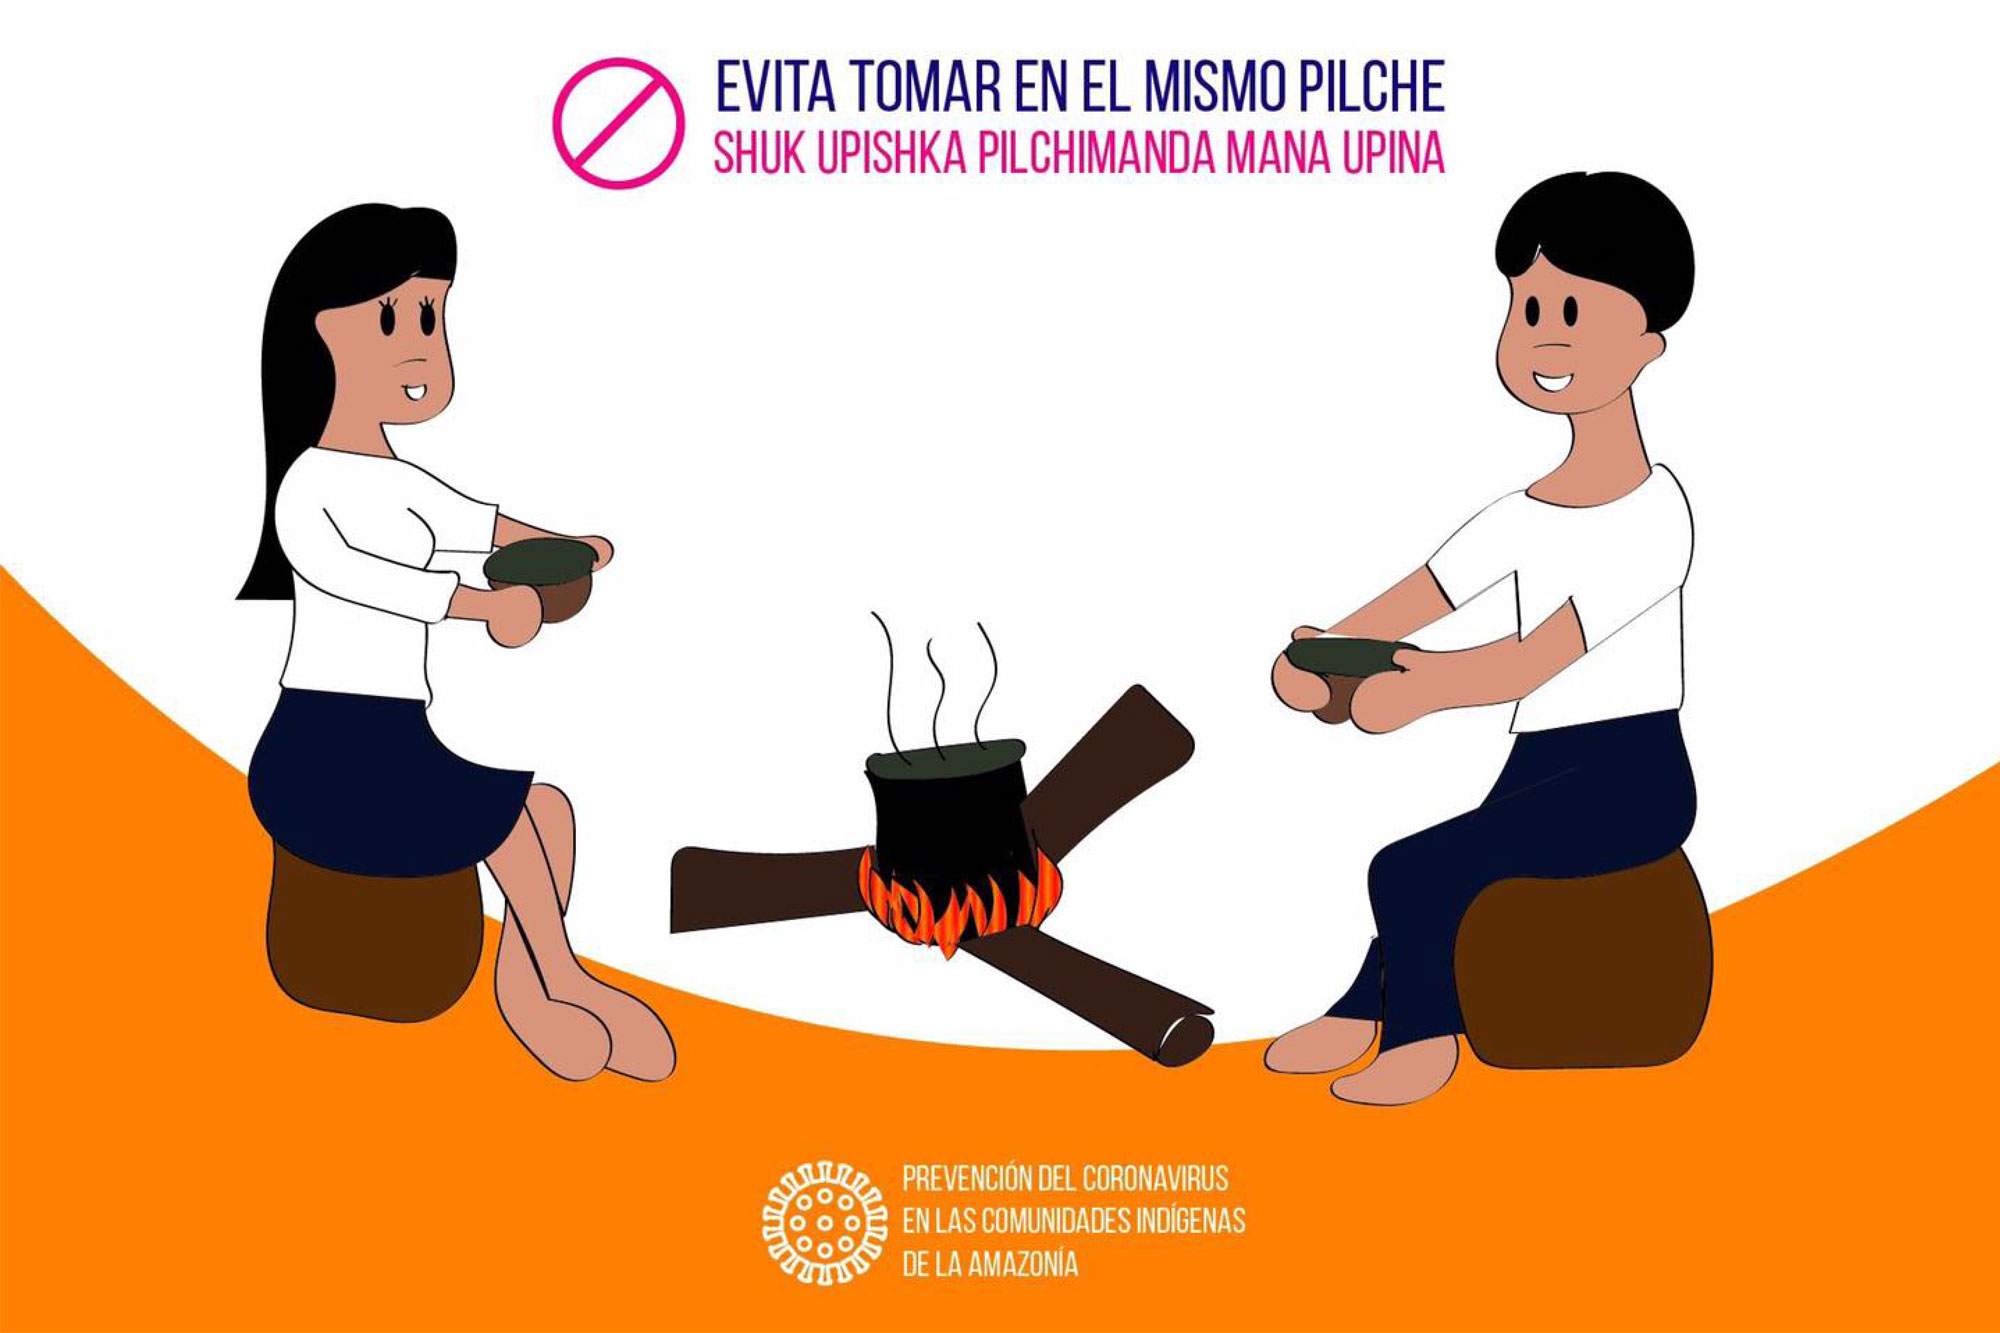 'Do not use the same calabash' educational graphic